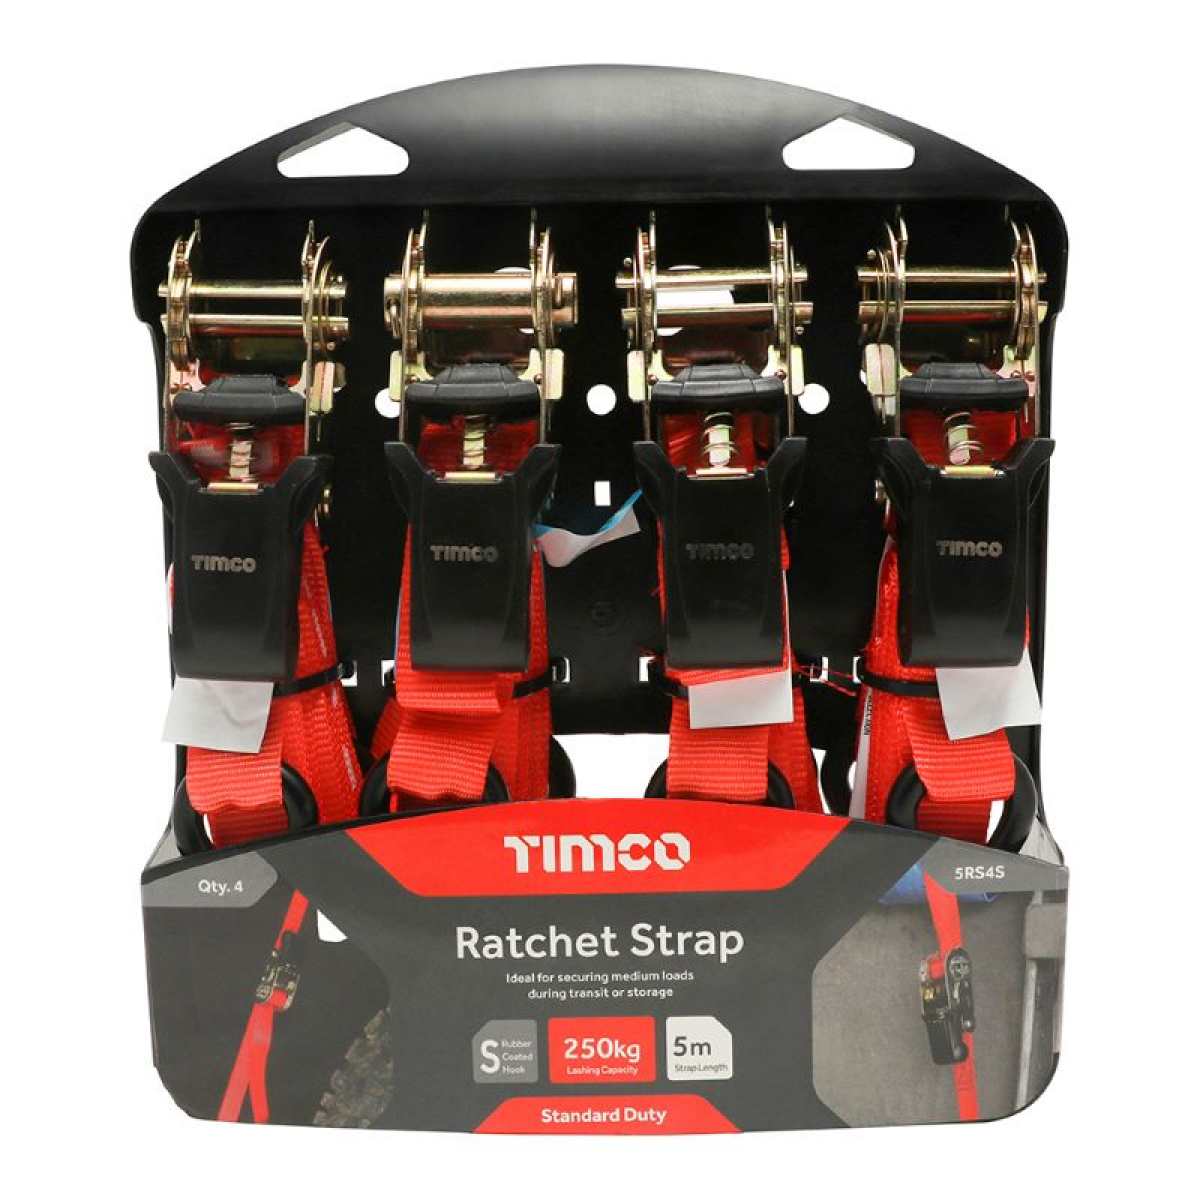 Ratchet Strap4 Image by Websters Timber